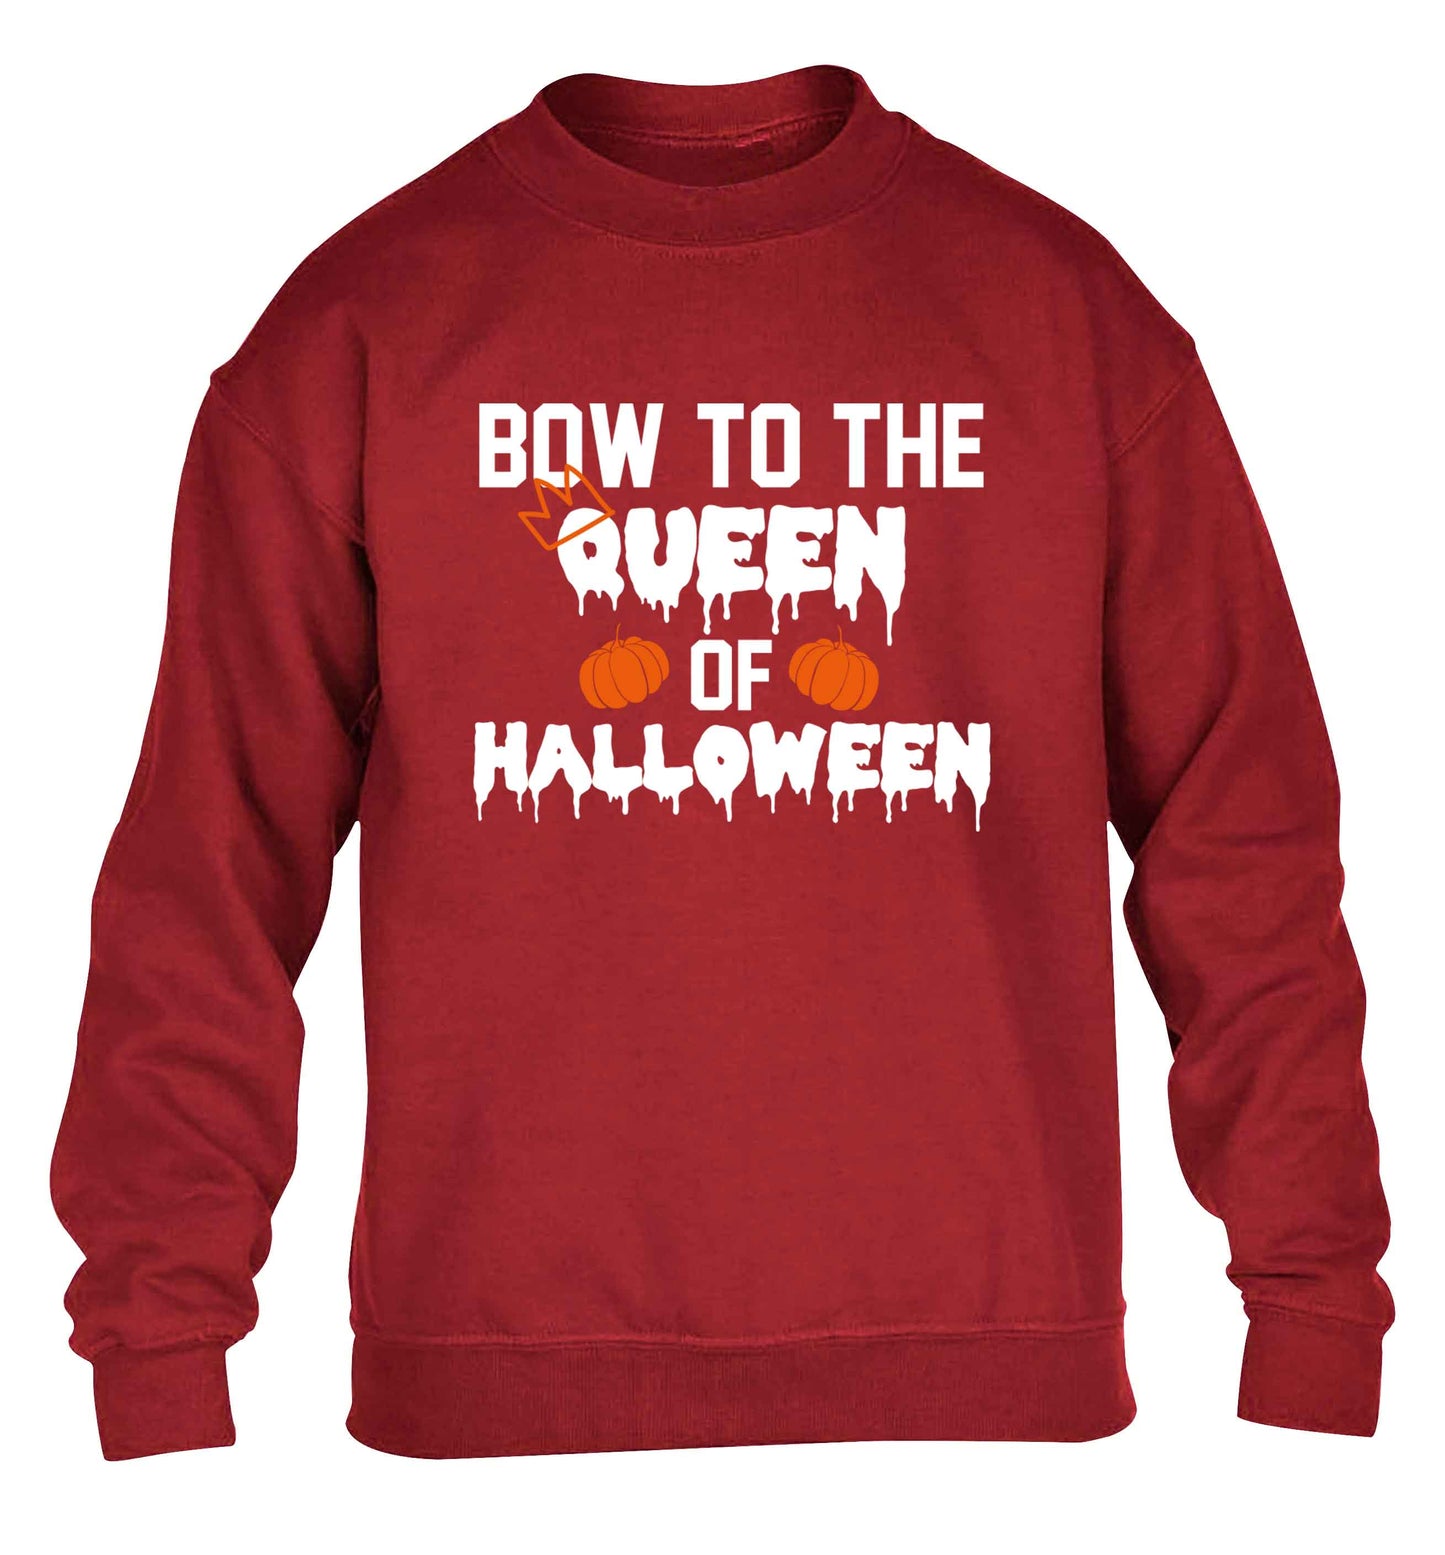 Bow to the Queen of halloween children's grey sweater 12-13 Years